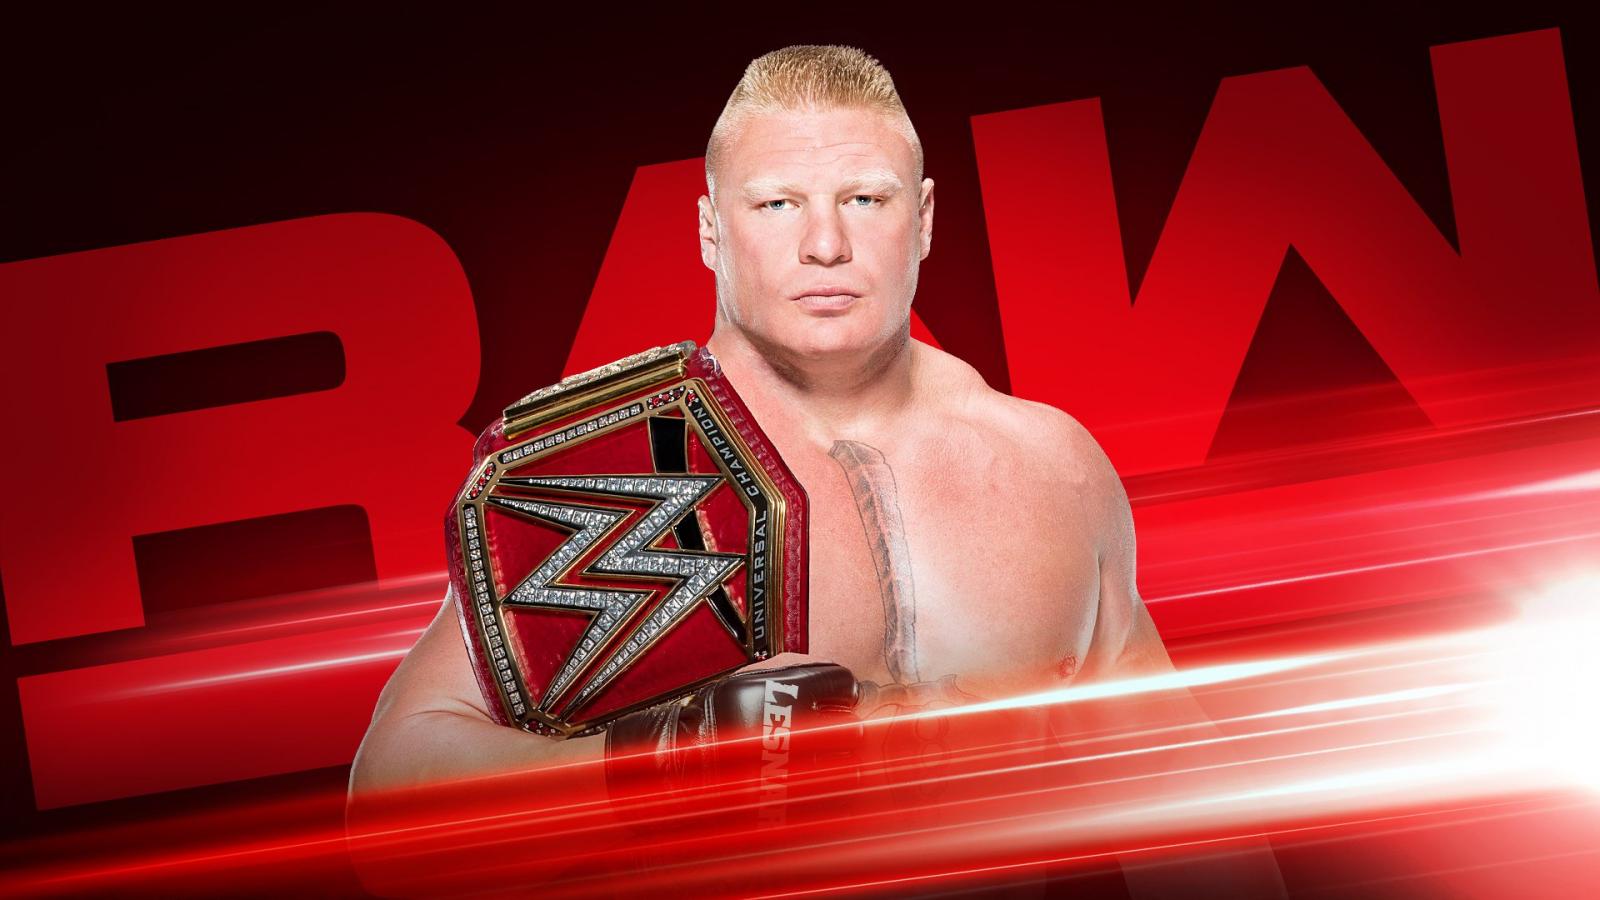 Brock Lesnar Biography: Age, Weight, Height, Achievements & Net Worth